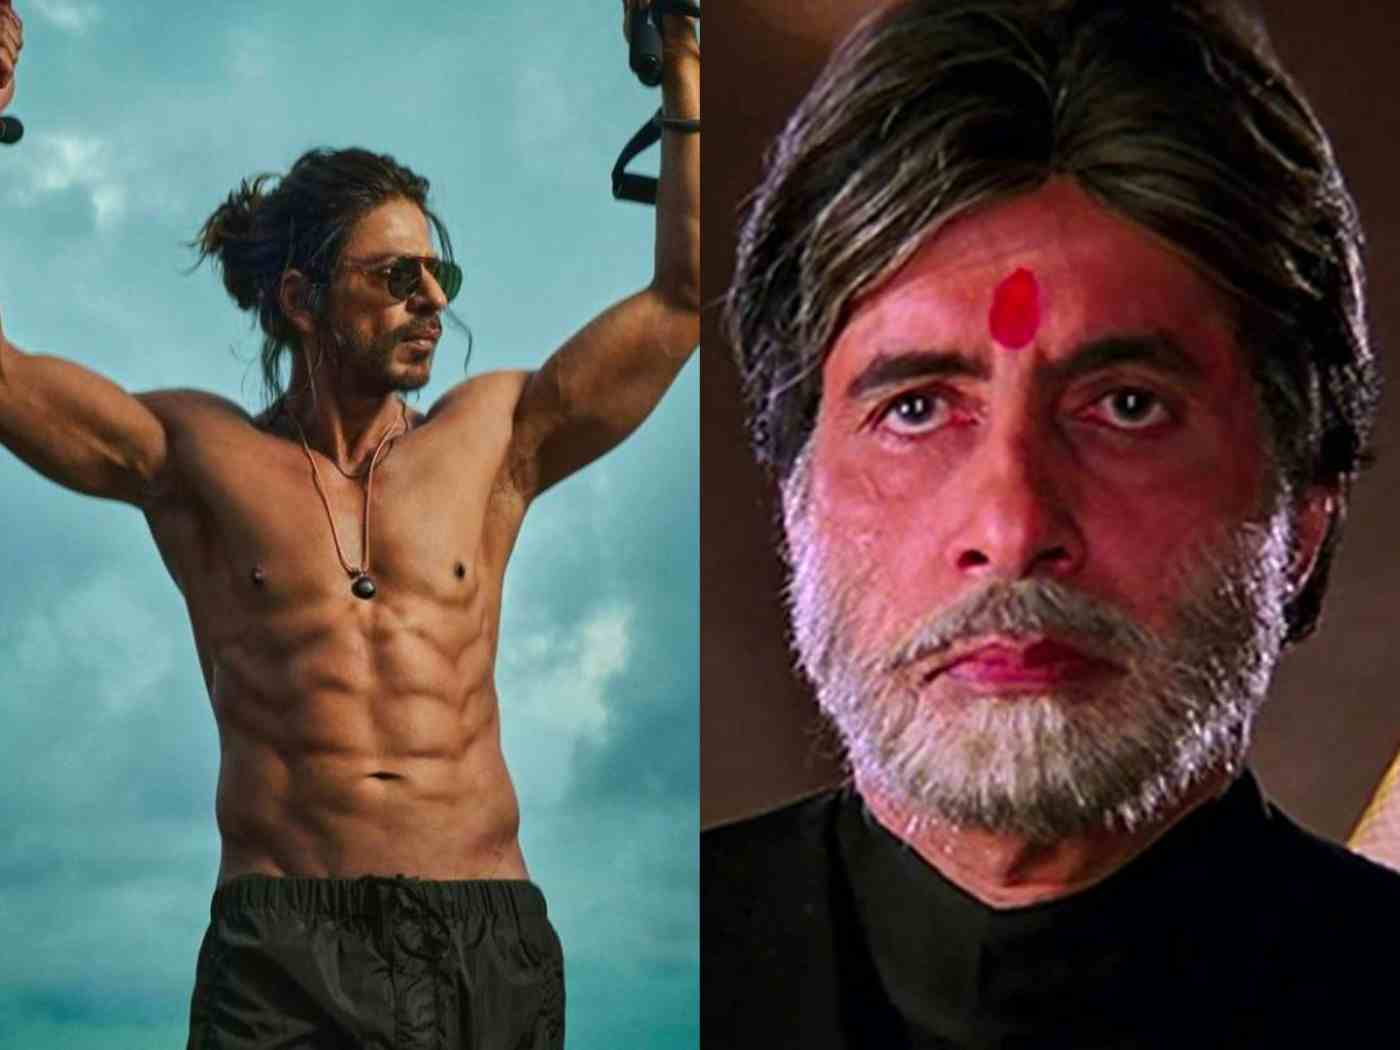 Shah Rukh Khan in 'Pathaan' and Amitabh Bachchan in 'Mohabbatein' were the same age, 57 (The Juggernaut)